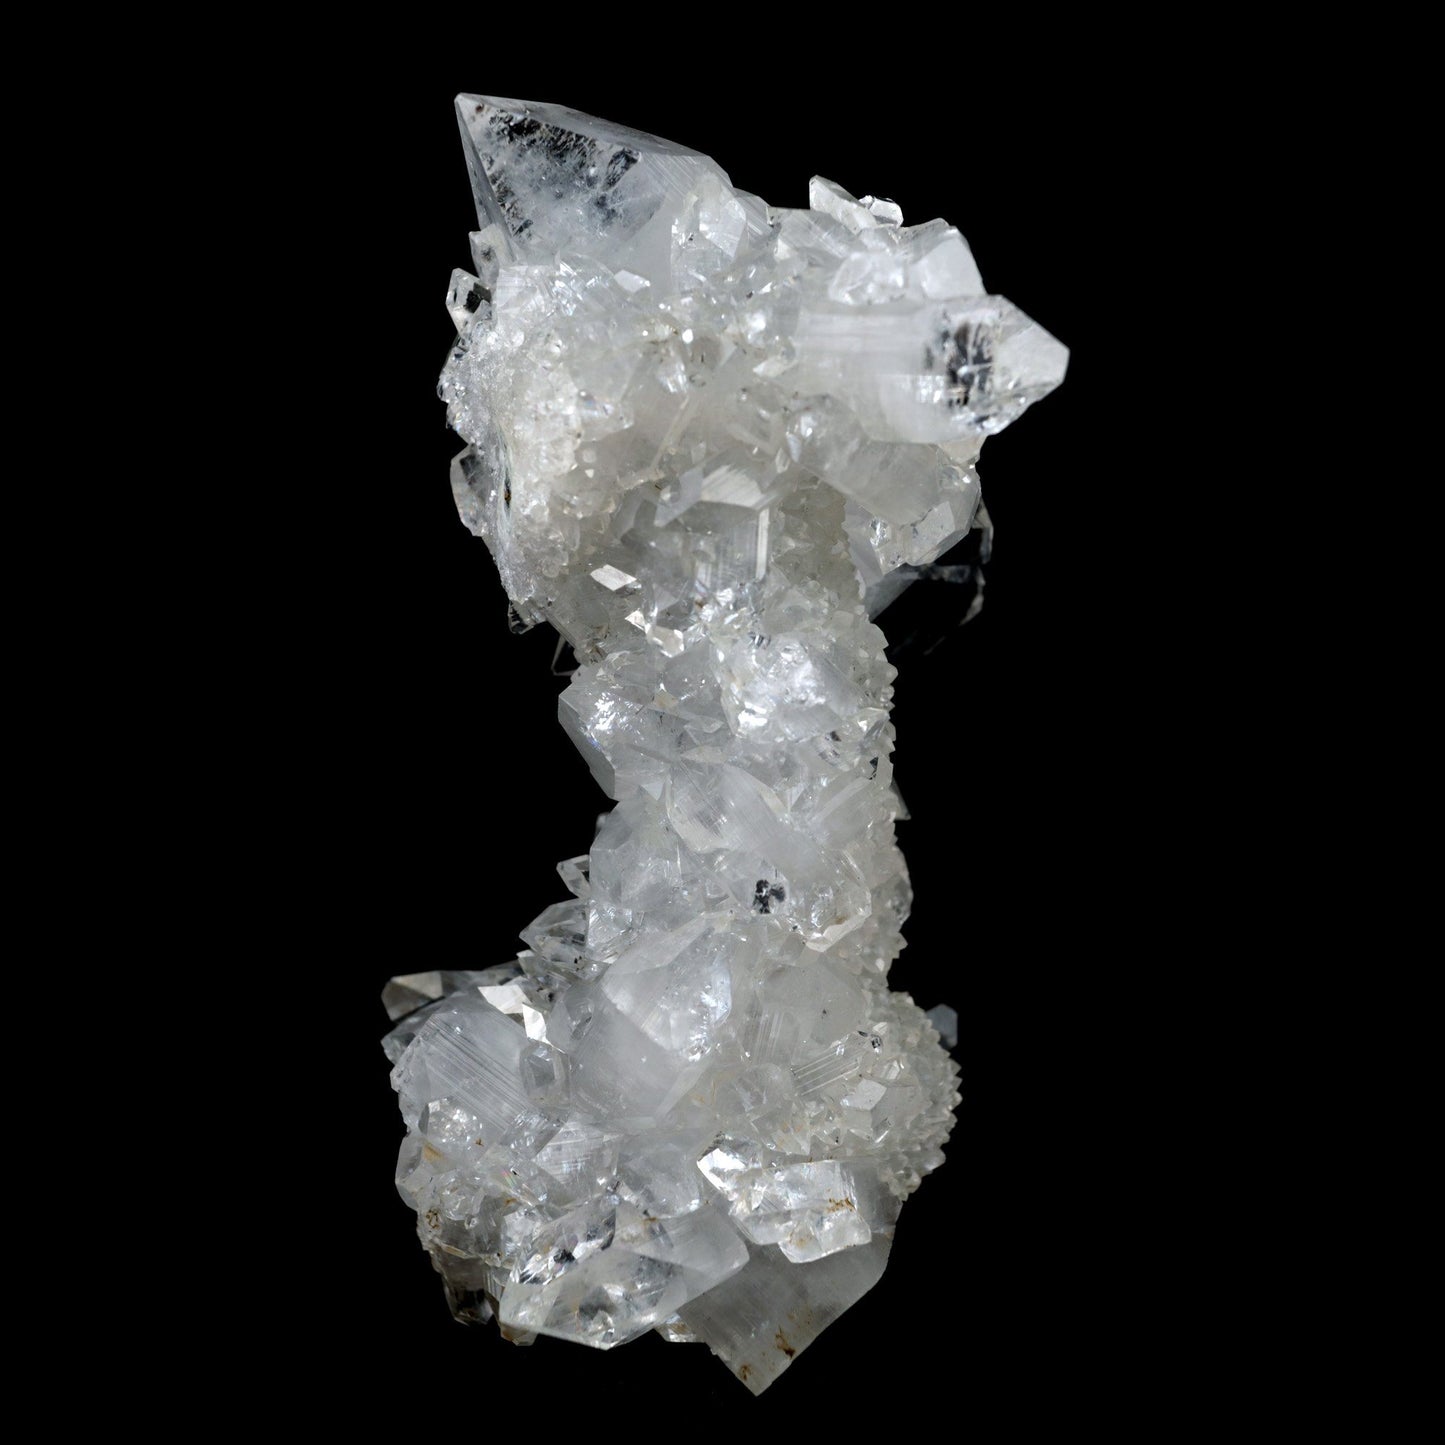 Apophyllite Pointed Big Crystal on MM Quartz Natural Mineral Specimen …  https://www.superbminerals.us/products/apophyllite-pointed-big-crystal-on-mm-quartz-natural-mineral-specimen-b-3926  FeaturesA bright white, microcrystalline Quartz with lustrous layer of Apophyllite crystals. The combination and contrast along with the luster, color and crystal formation is outstanding.&nbsp;Primary Mineral(s):&nbsp; ApophylliteSecondary Mineral(s): MM Quartz